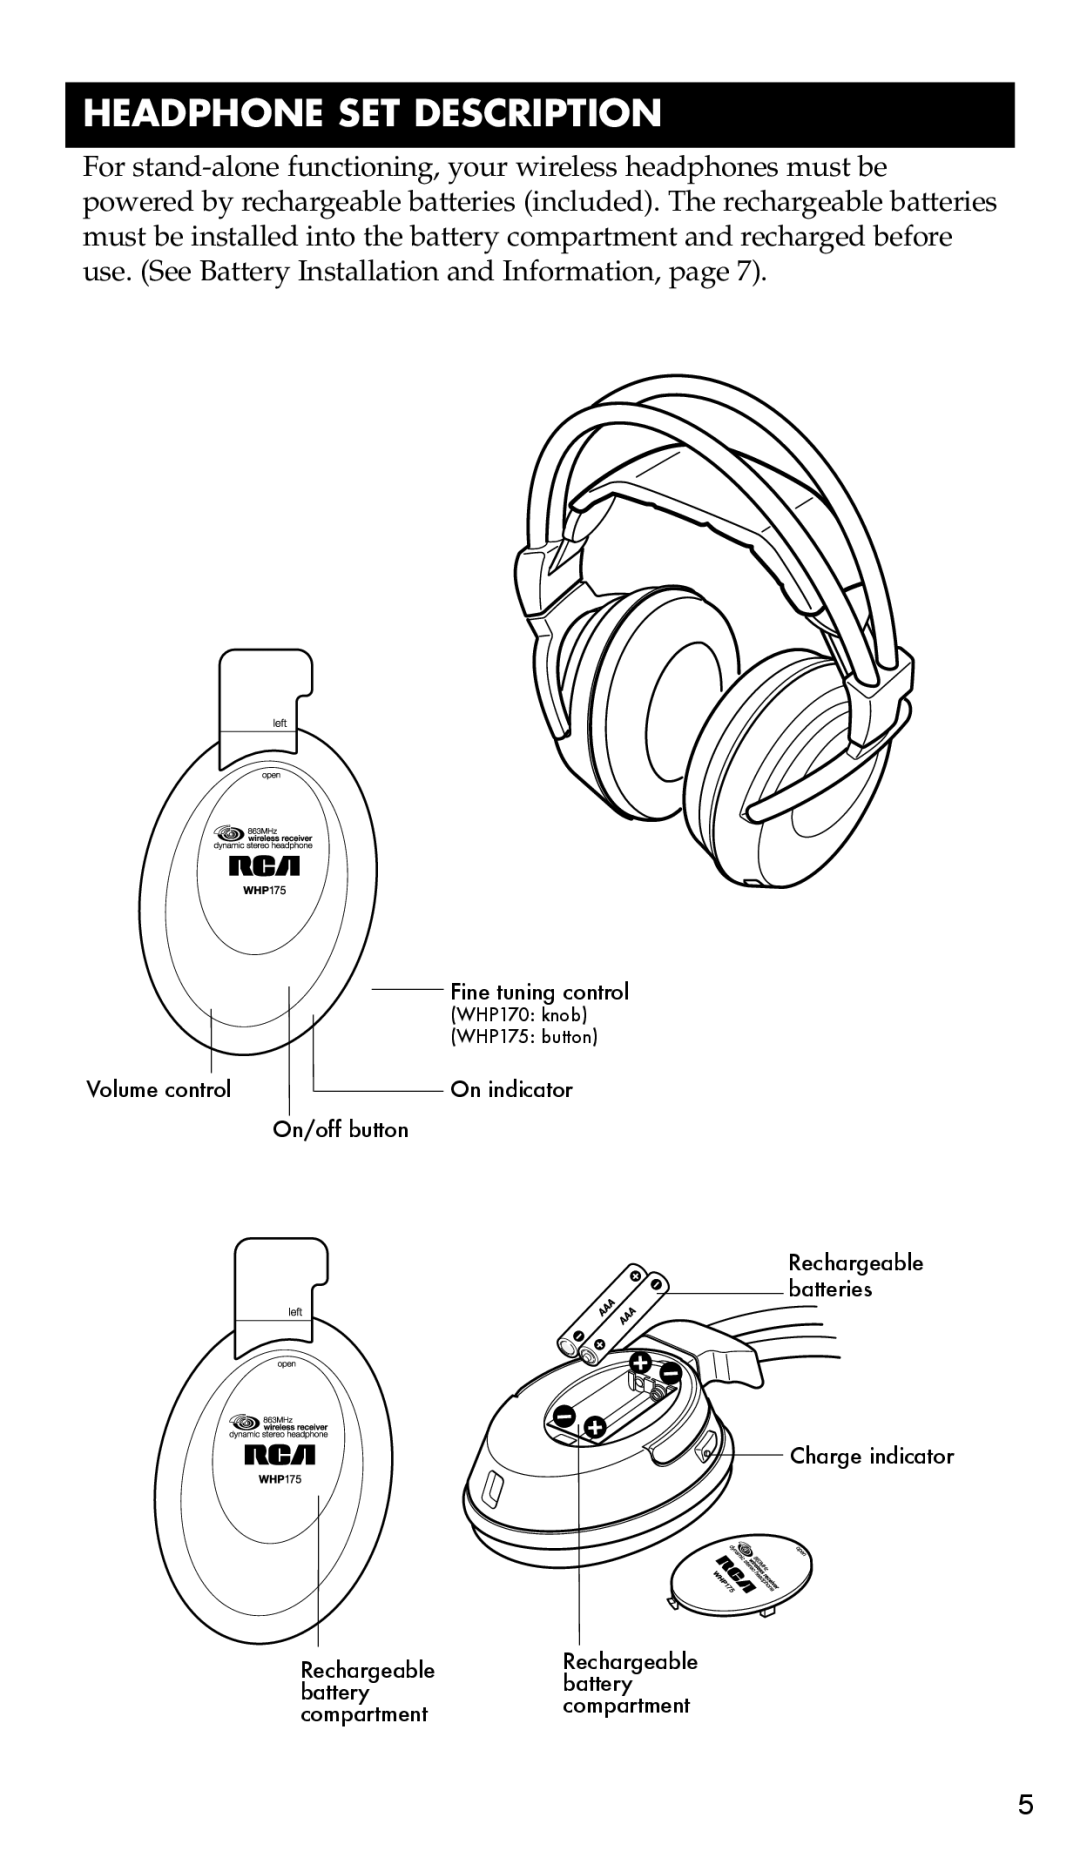 RCA WHP170, WHP175 manual Headphone Set Description, Fine tuning control, Volume control, On indicator, On/off button 